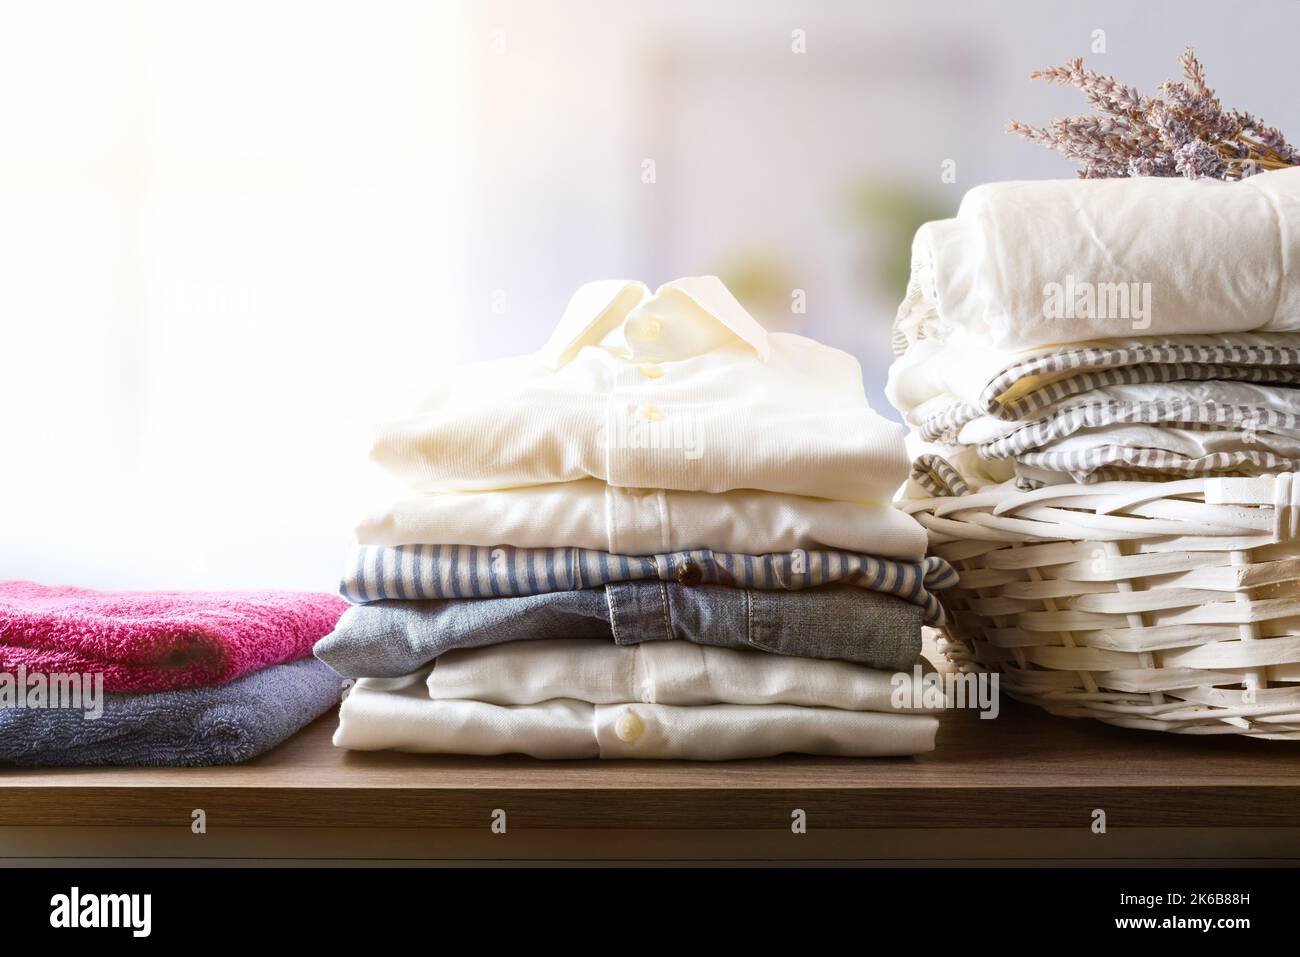 Clean clothes folded on a wooden shelf in a rooms on a wooden shelf in bedroom. Front view. Horizontal composition. Stock Photo